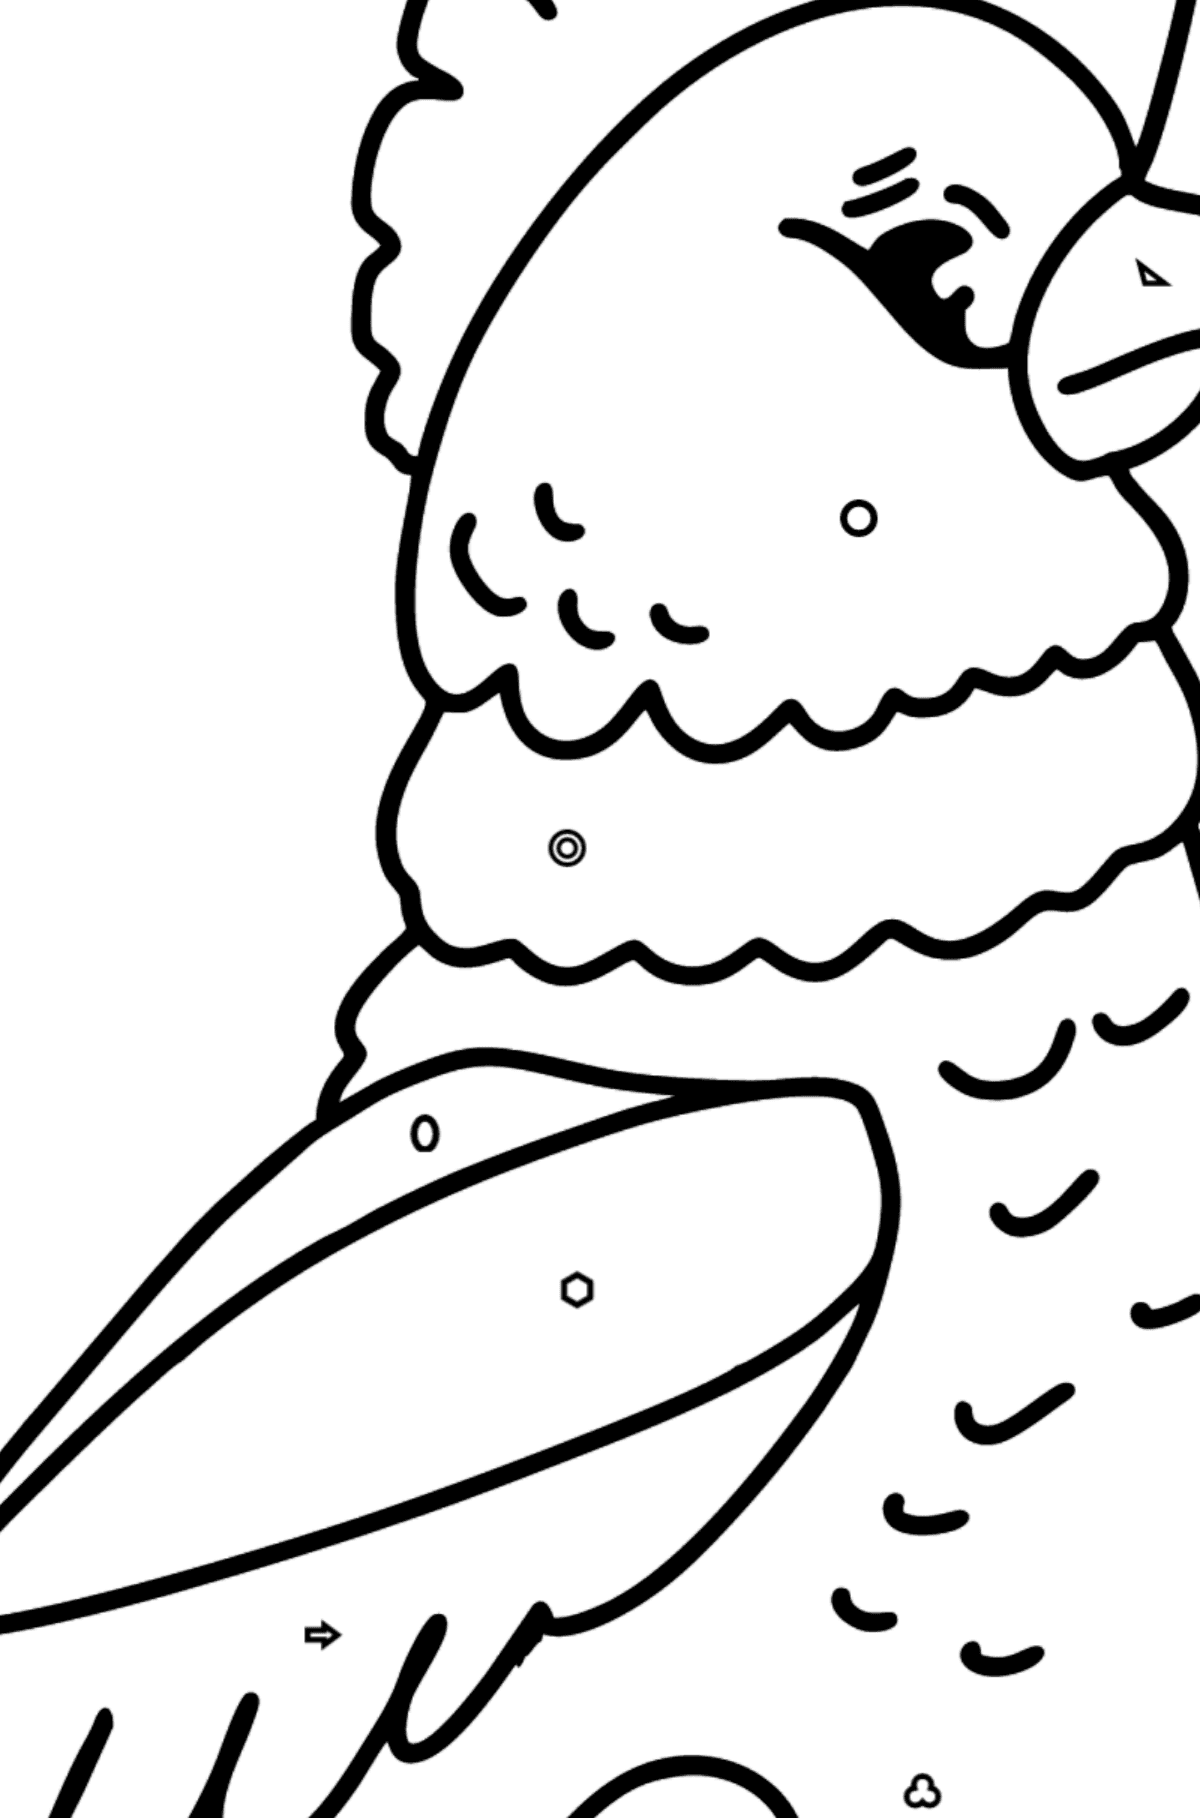 Cockatoo coloring page - Coloring by Geometric Shapes for Kids